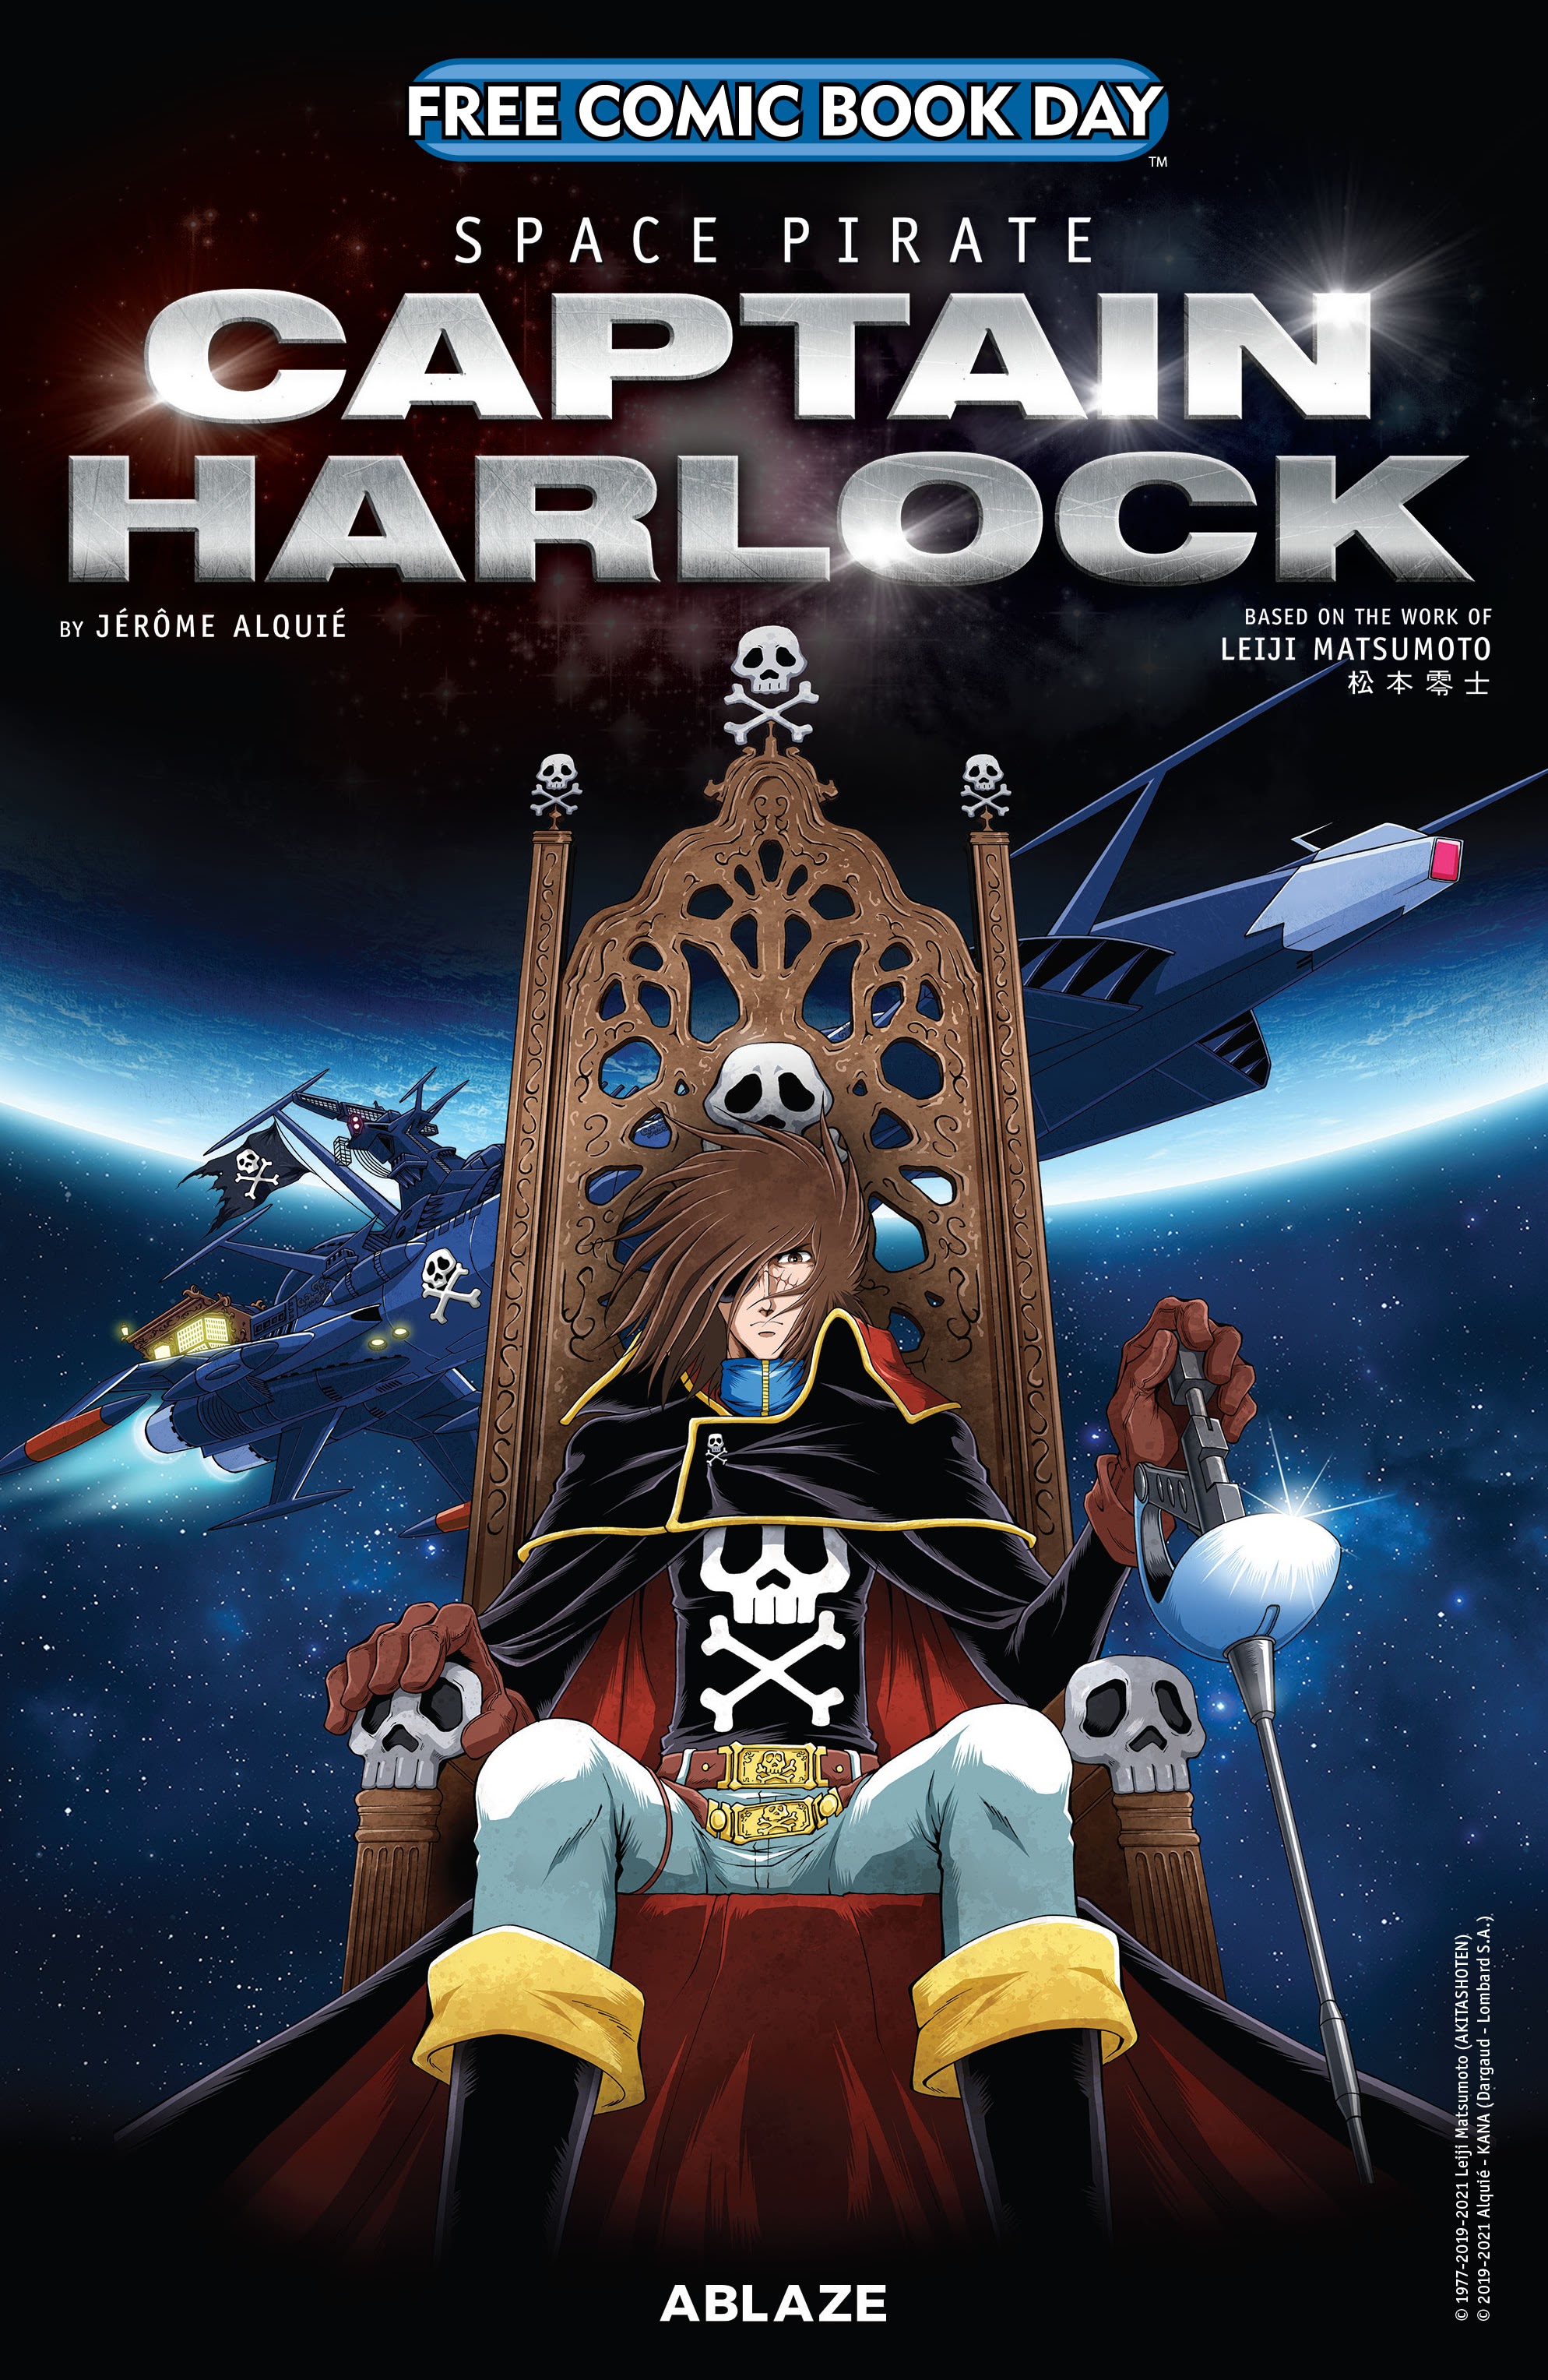 Read online Free Comic Book Day 2021 comic -  Issue # Space Pirate Captain Harlock - 1